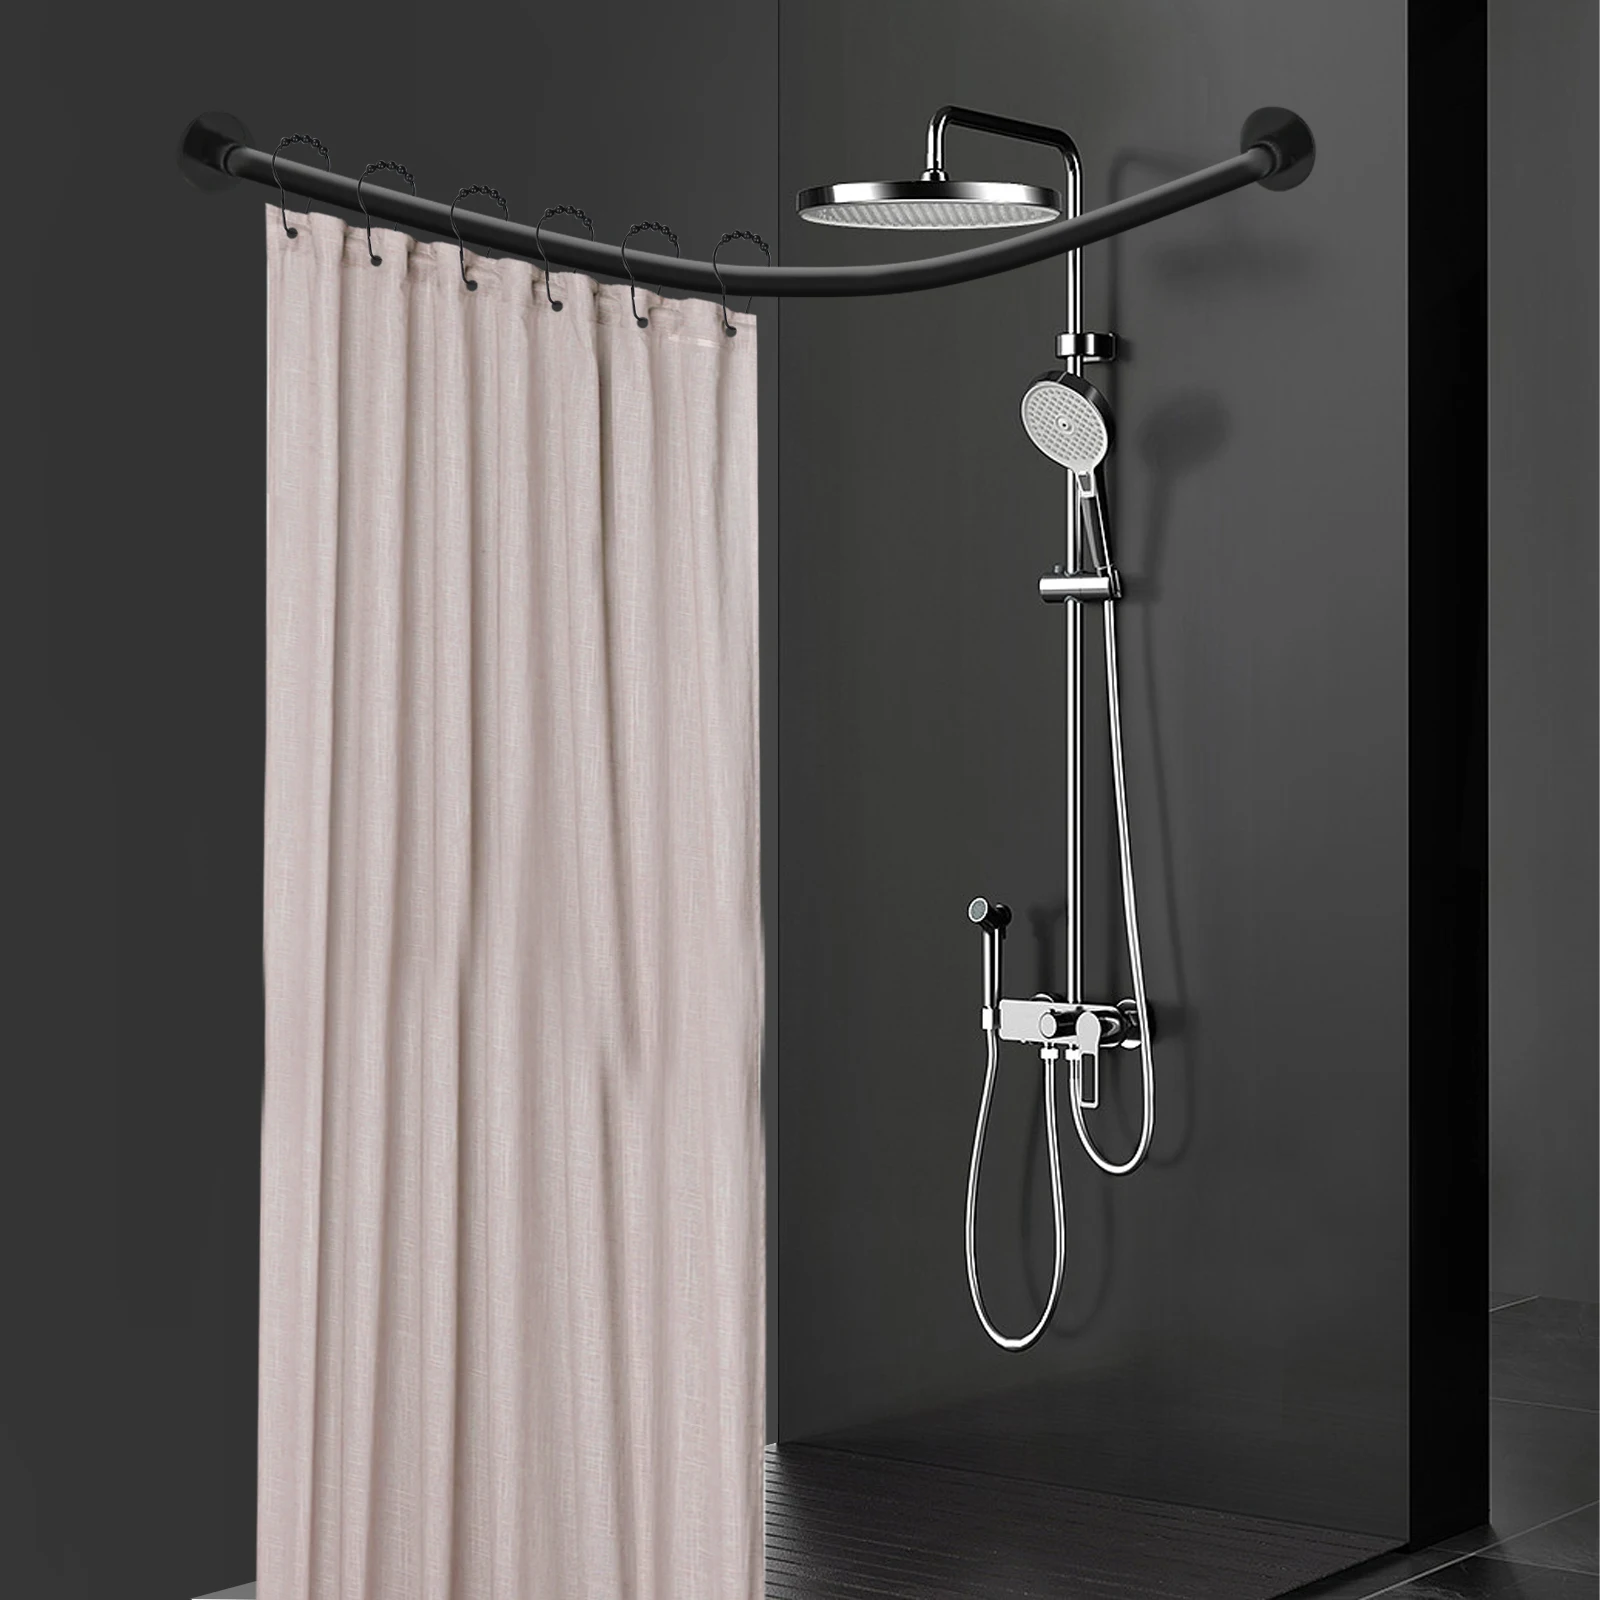 

L-Shape Shower Curtain Rod No Drilling Shower Curtain Rail Stainless Steel Corner Telescopic with Shower Curtain Rings Black